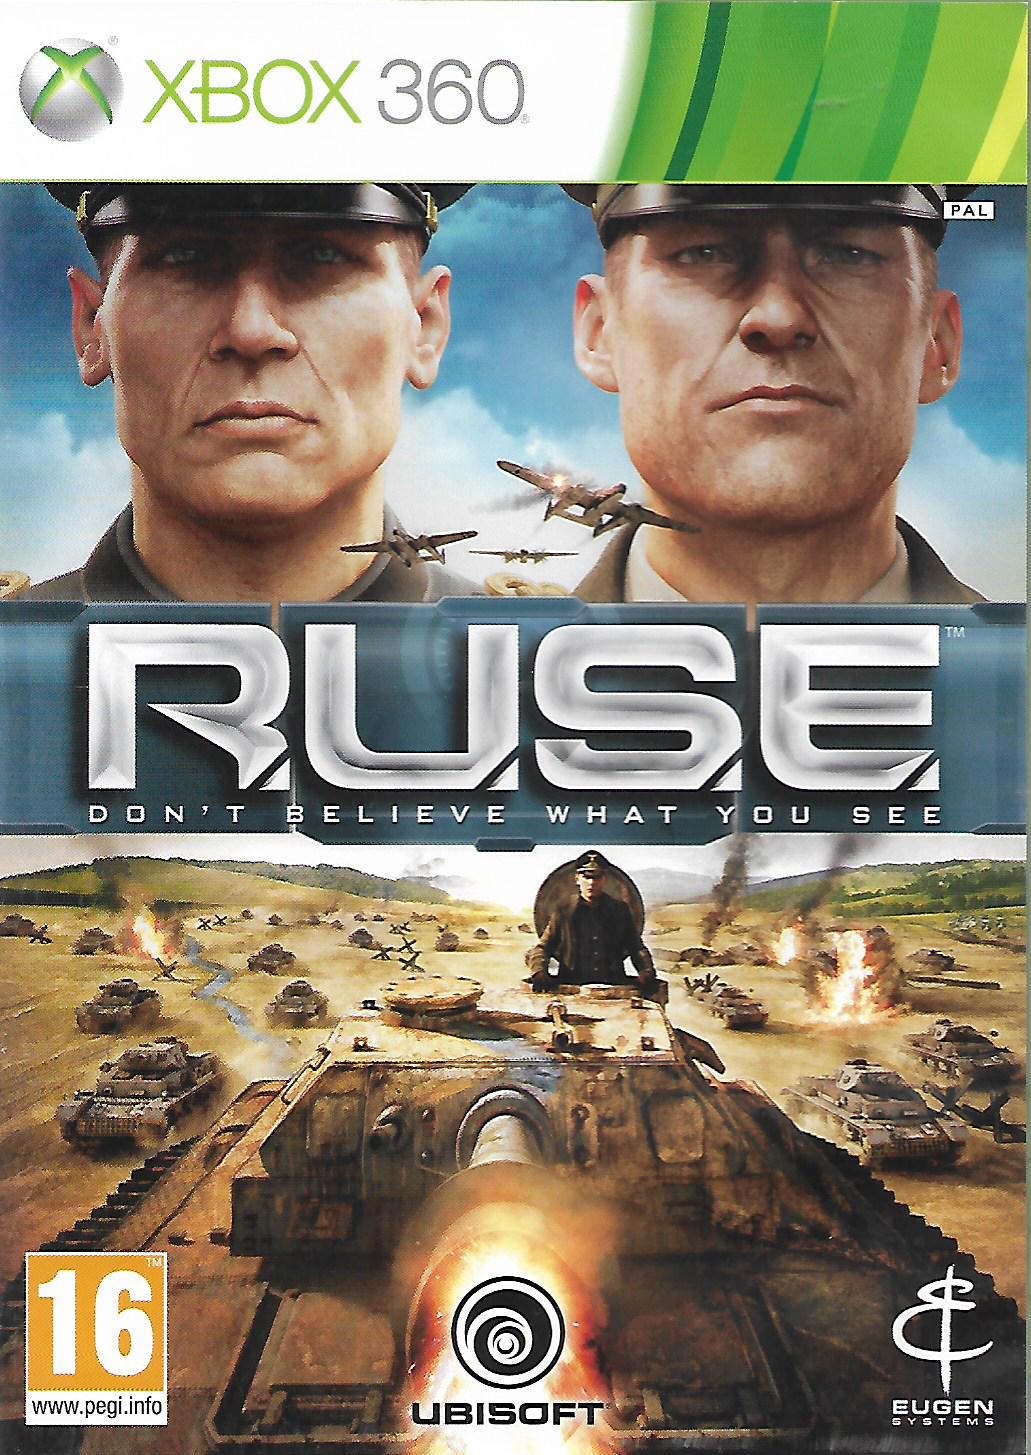 R.U.S.E. - DON'T BELIEVE WHAT YOU SEE (XBOX 360 - bazar)